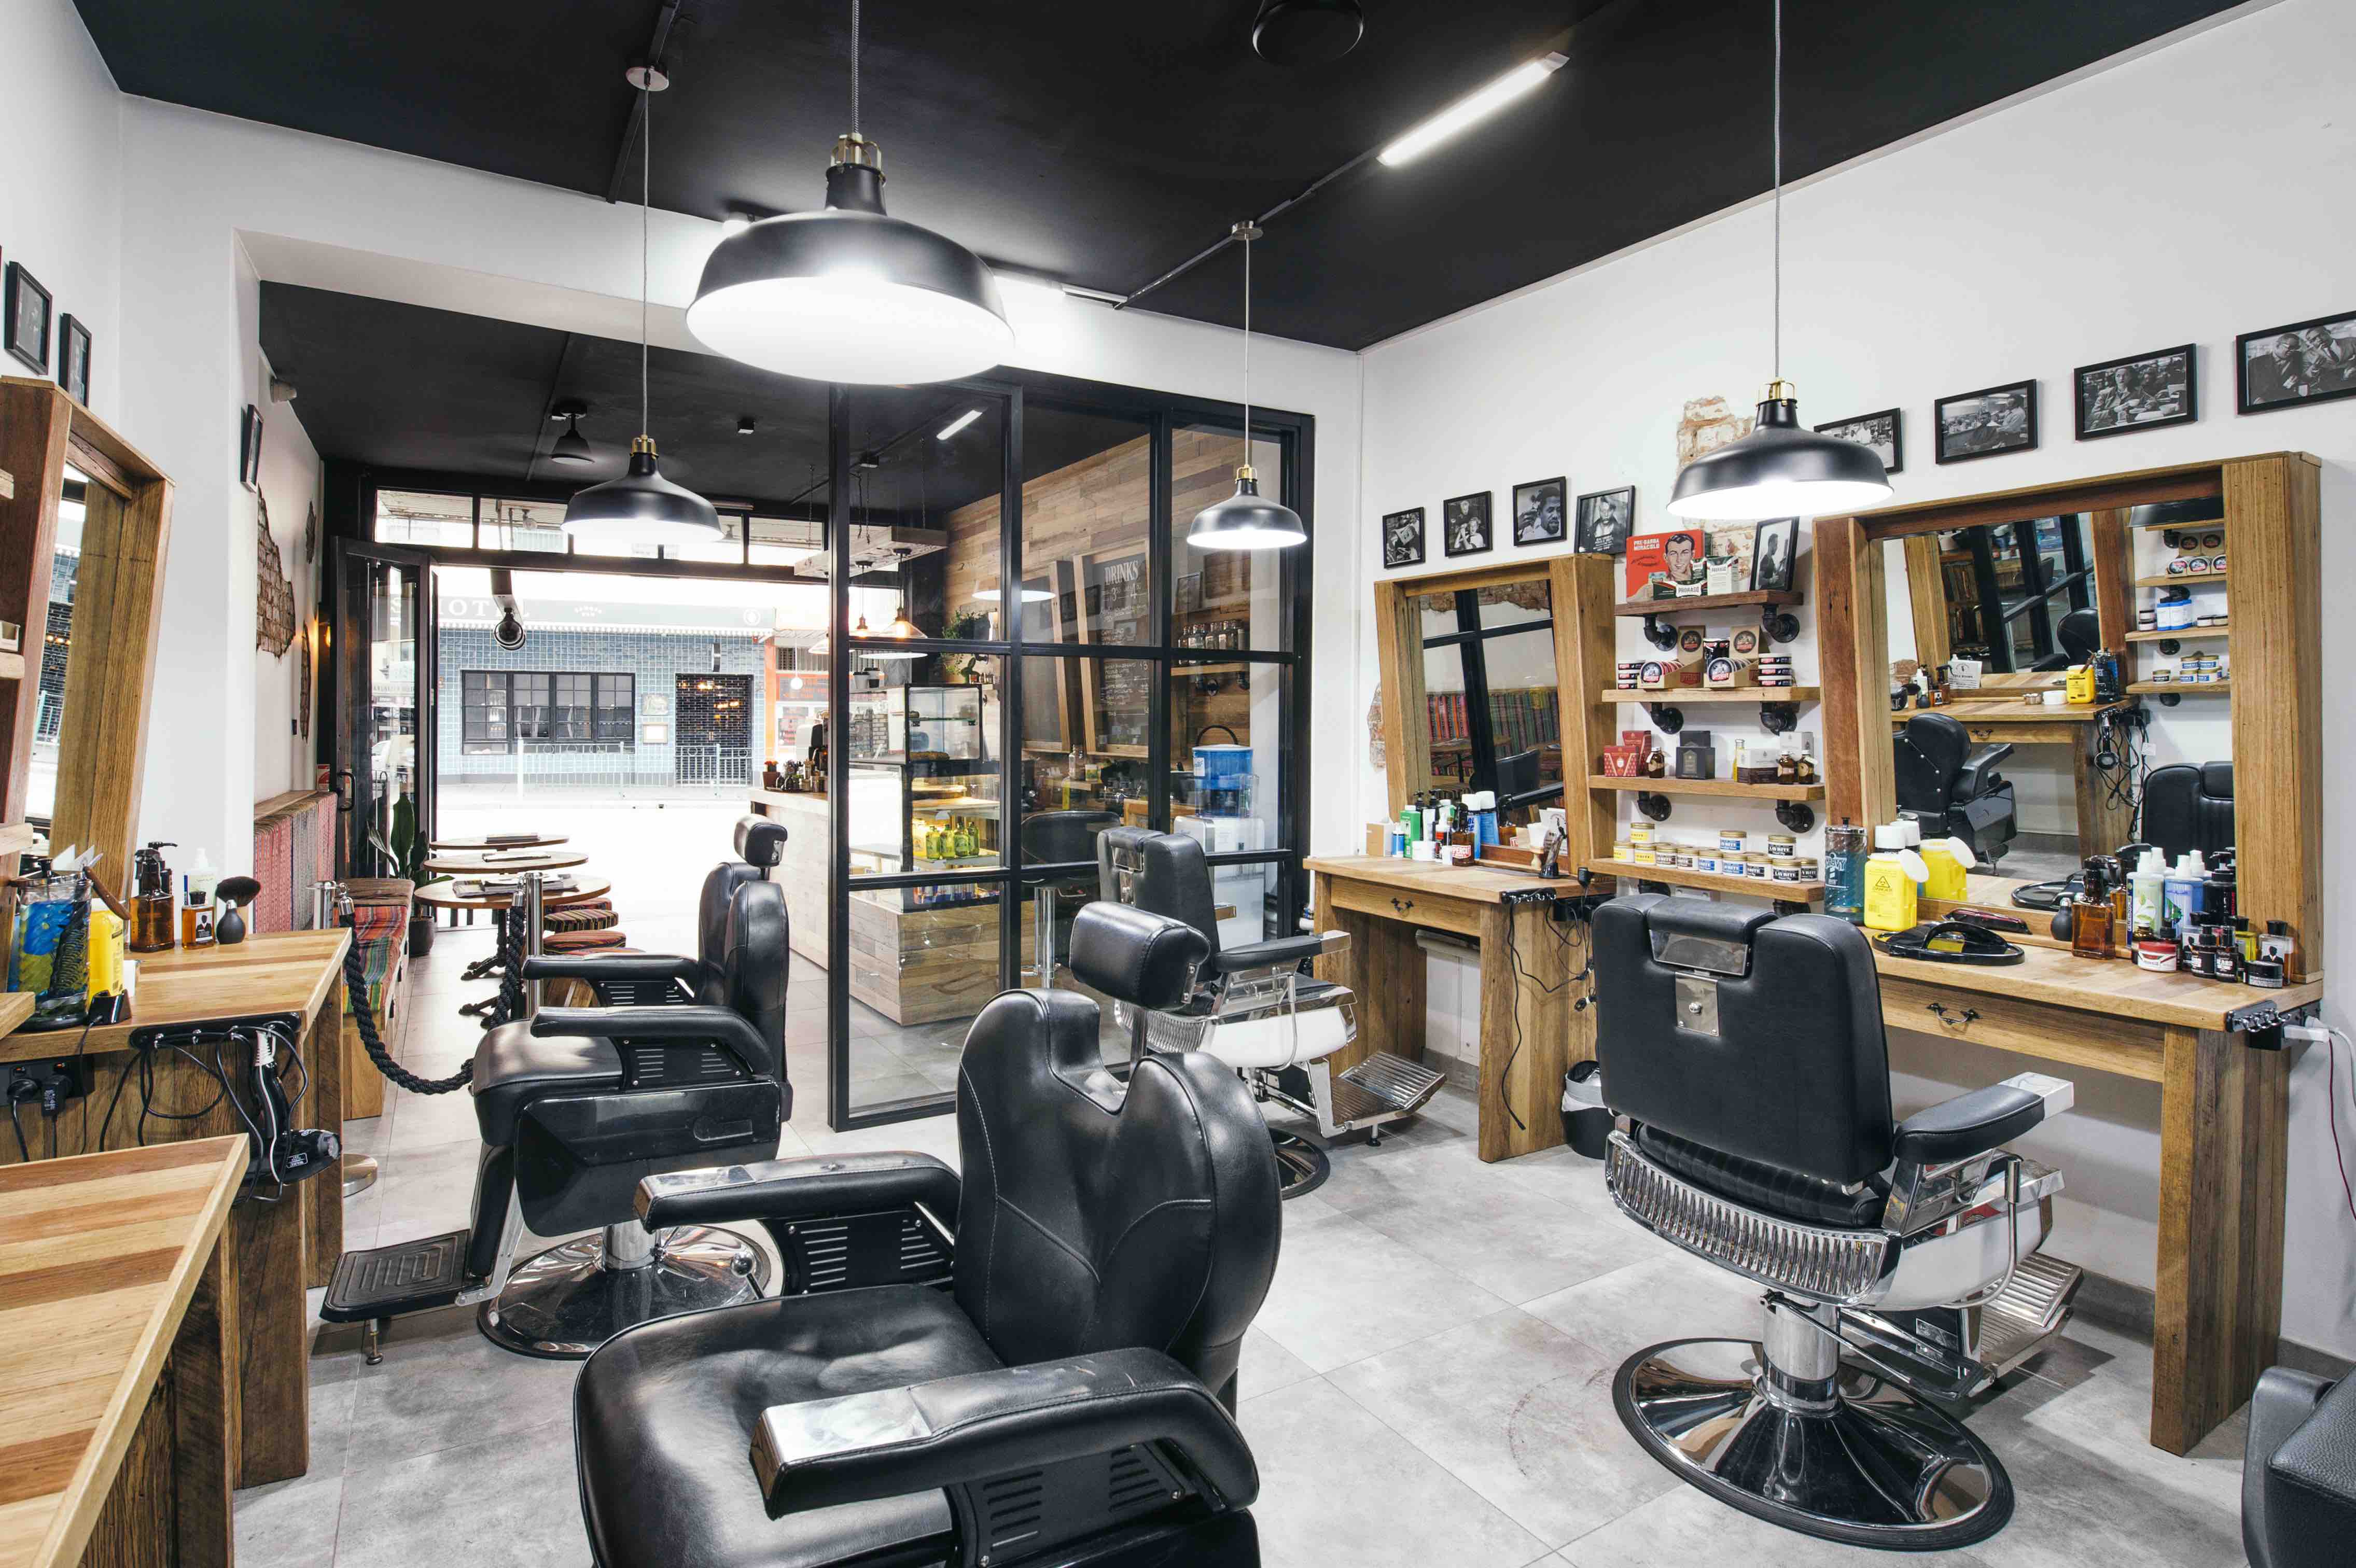 The Barbershop with More | WoodSolutions